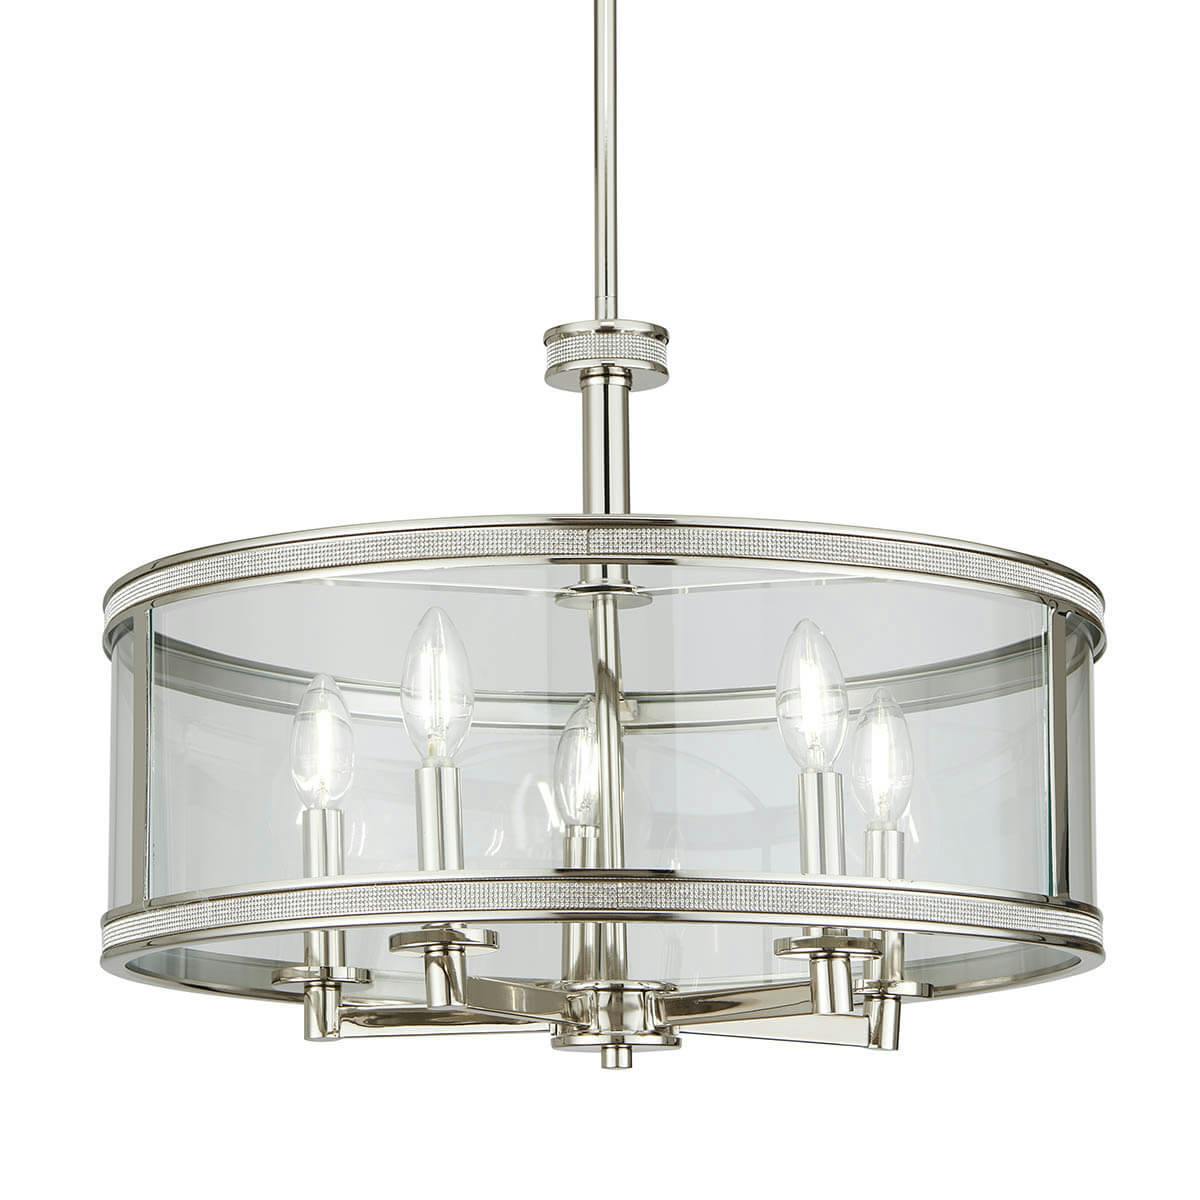 Angelica 5 Light Pendant Polished Nickel on a white background